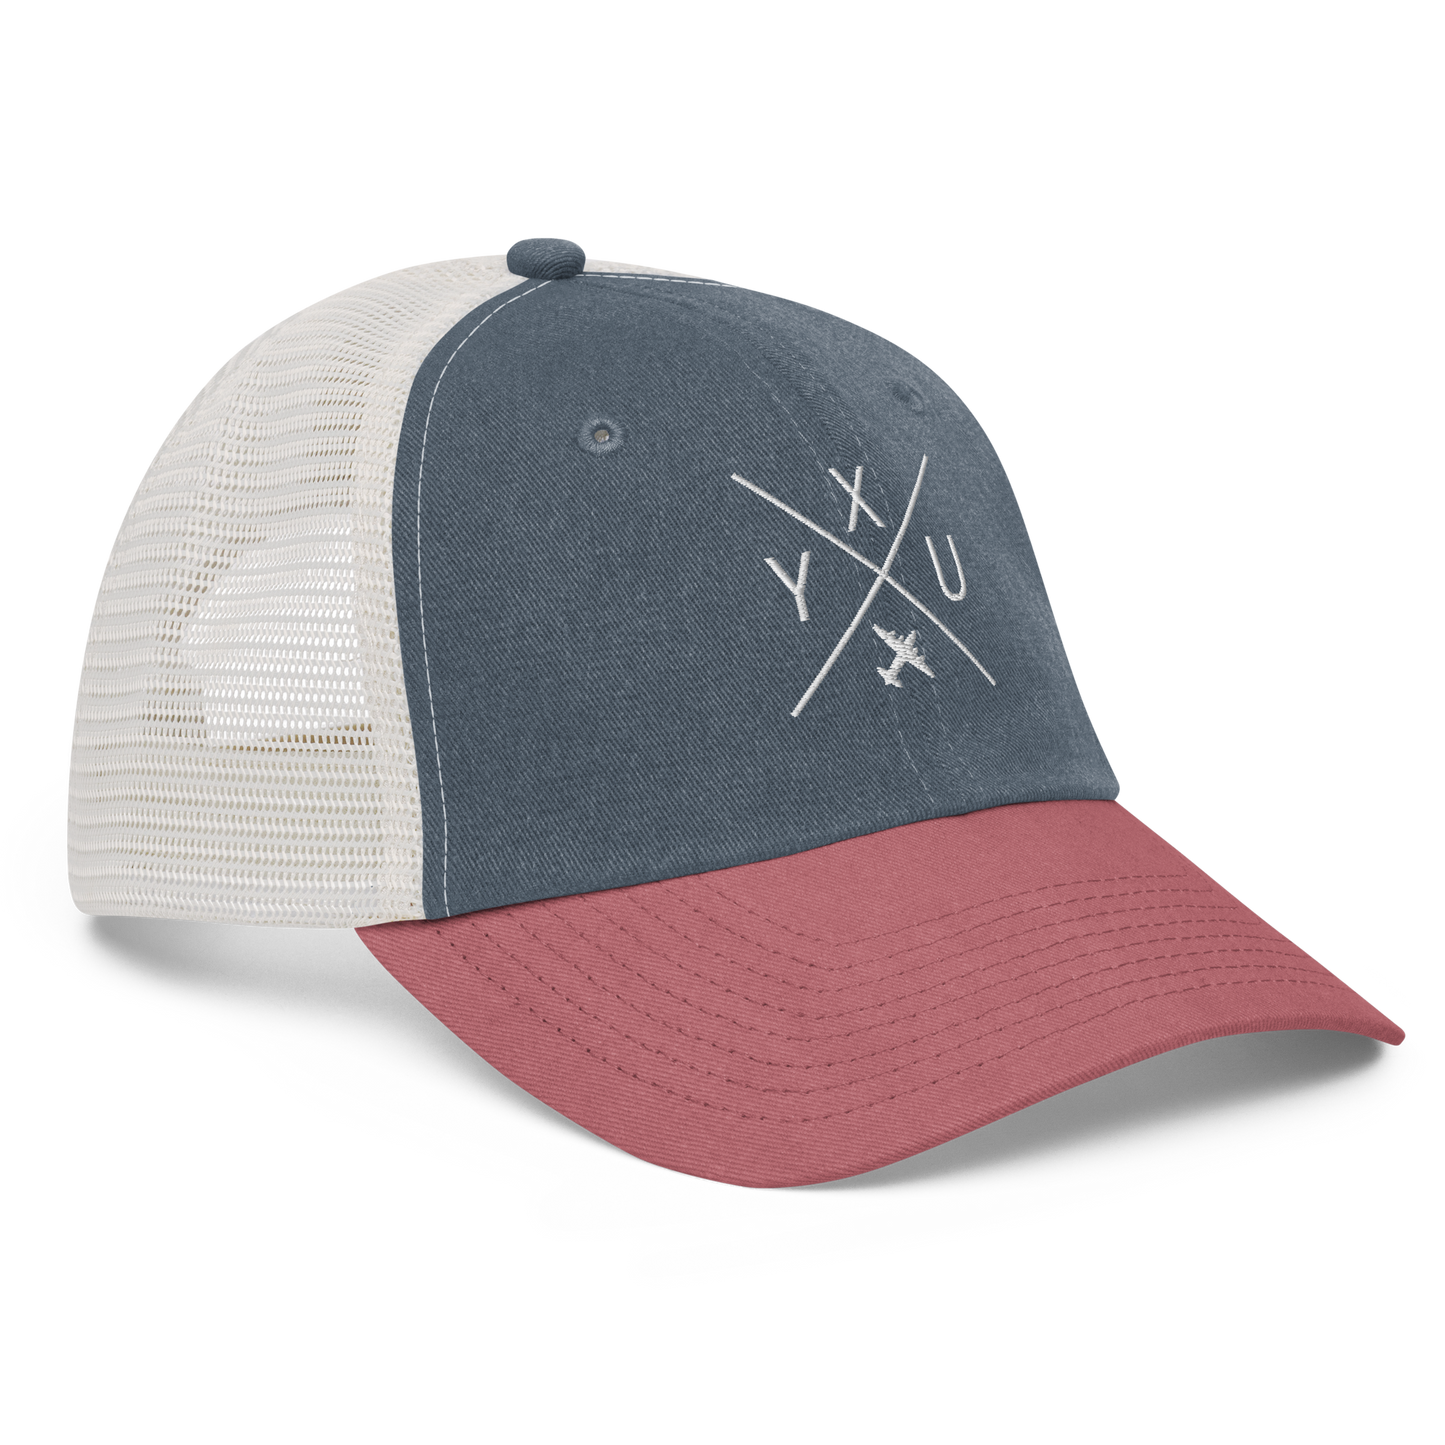 YHM Designs - YXU London Pigment-Dyed Trucker Cap - Crossed-X Design with Airport Code and Vintage Propliner - White Embroidery - Image 13